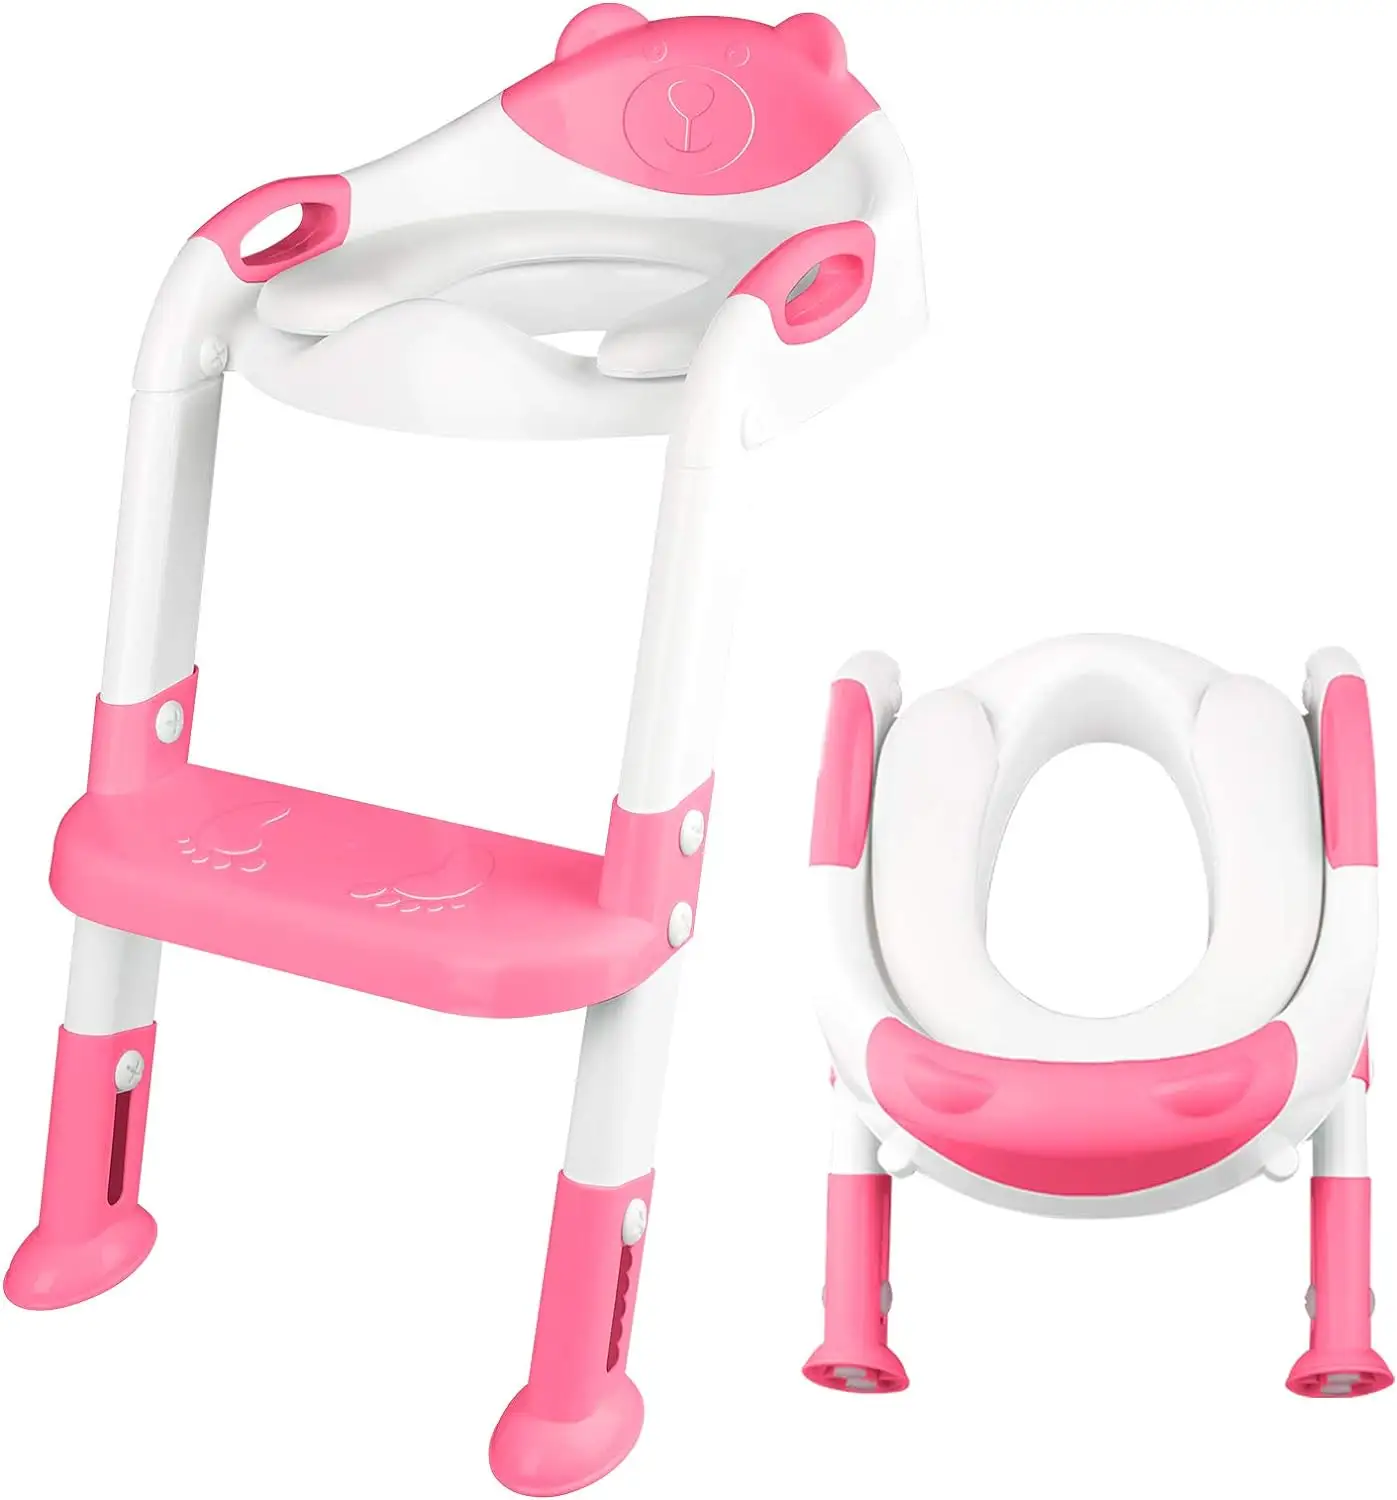 Toddler Potty Chair for Boys and Girls Toilet travel Potty Training Seat with Step Stool Ladder Splash Guard and Safety handle